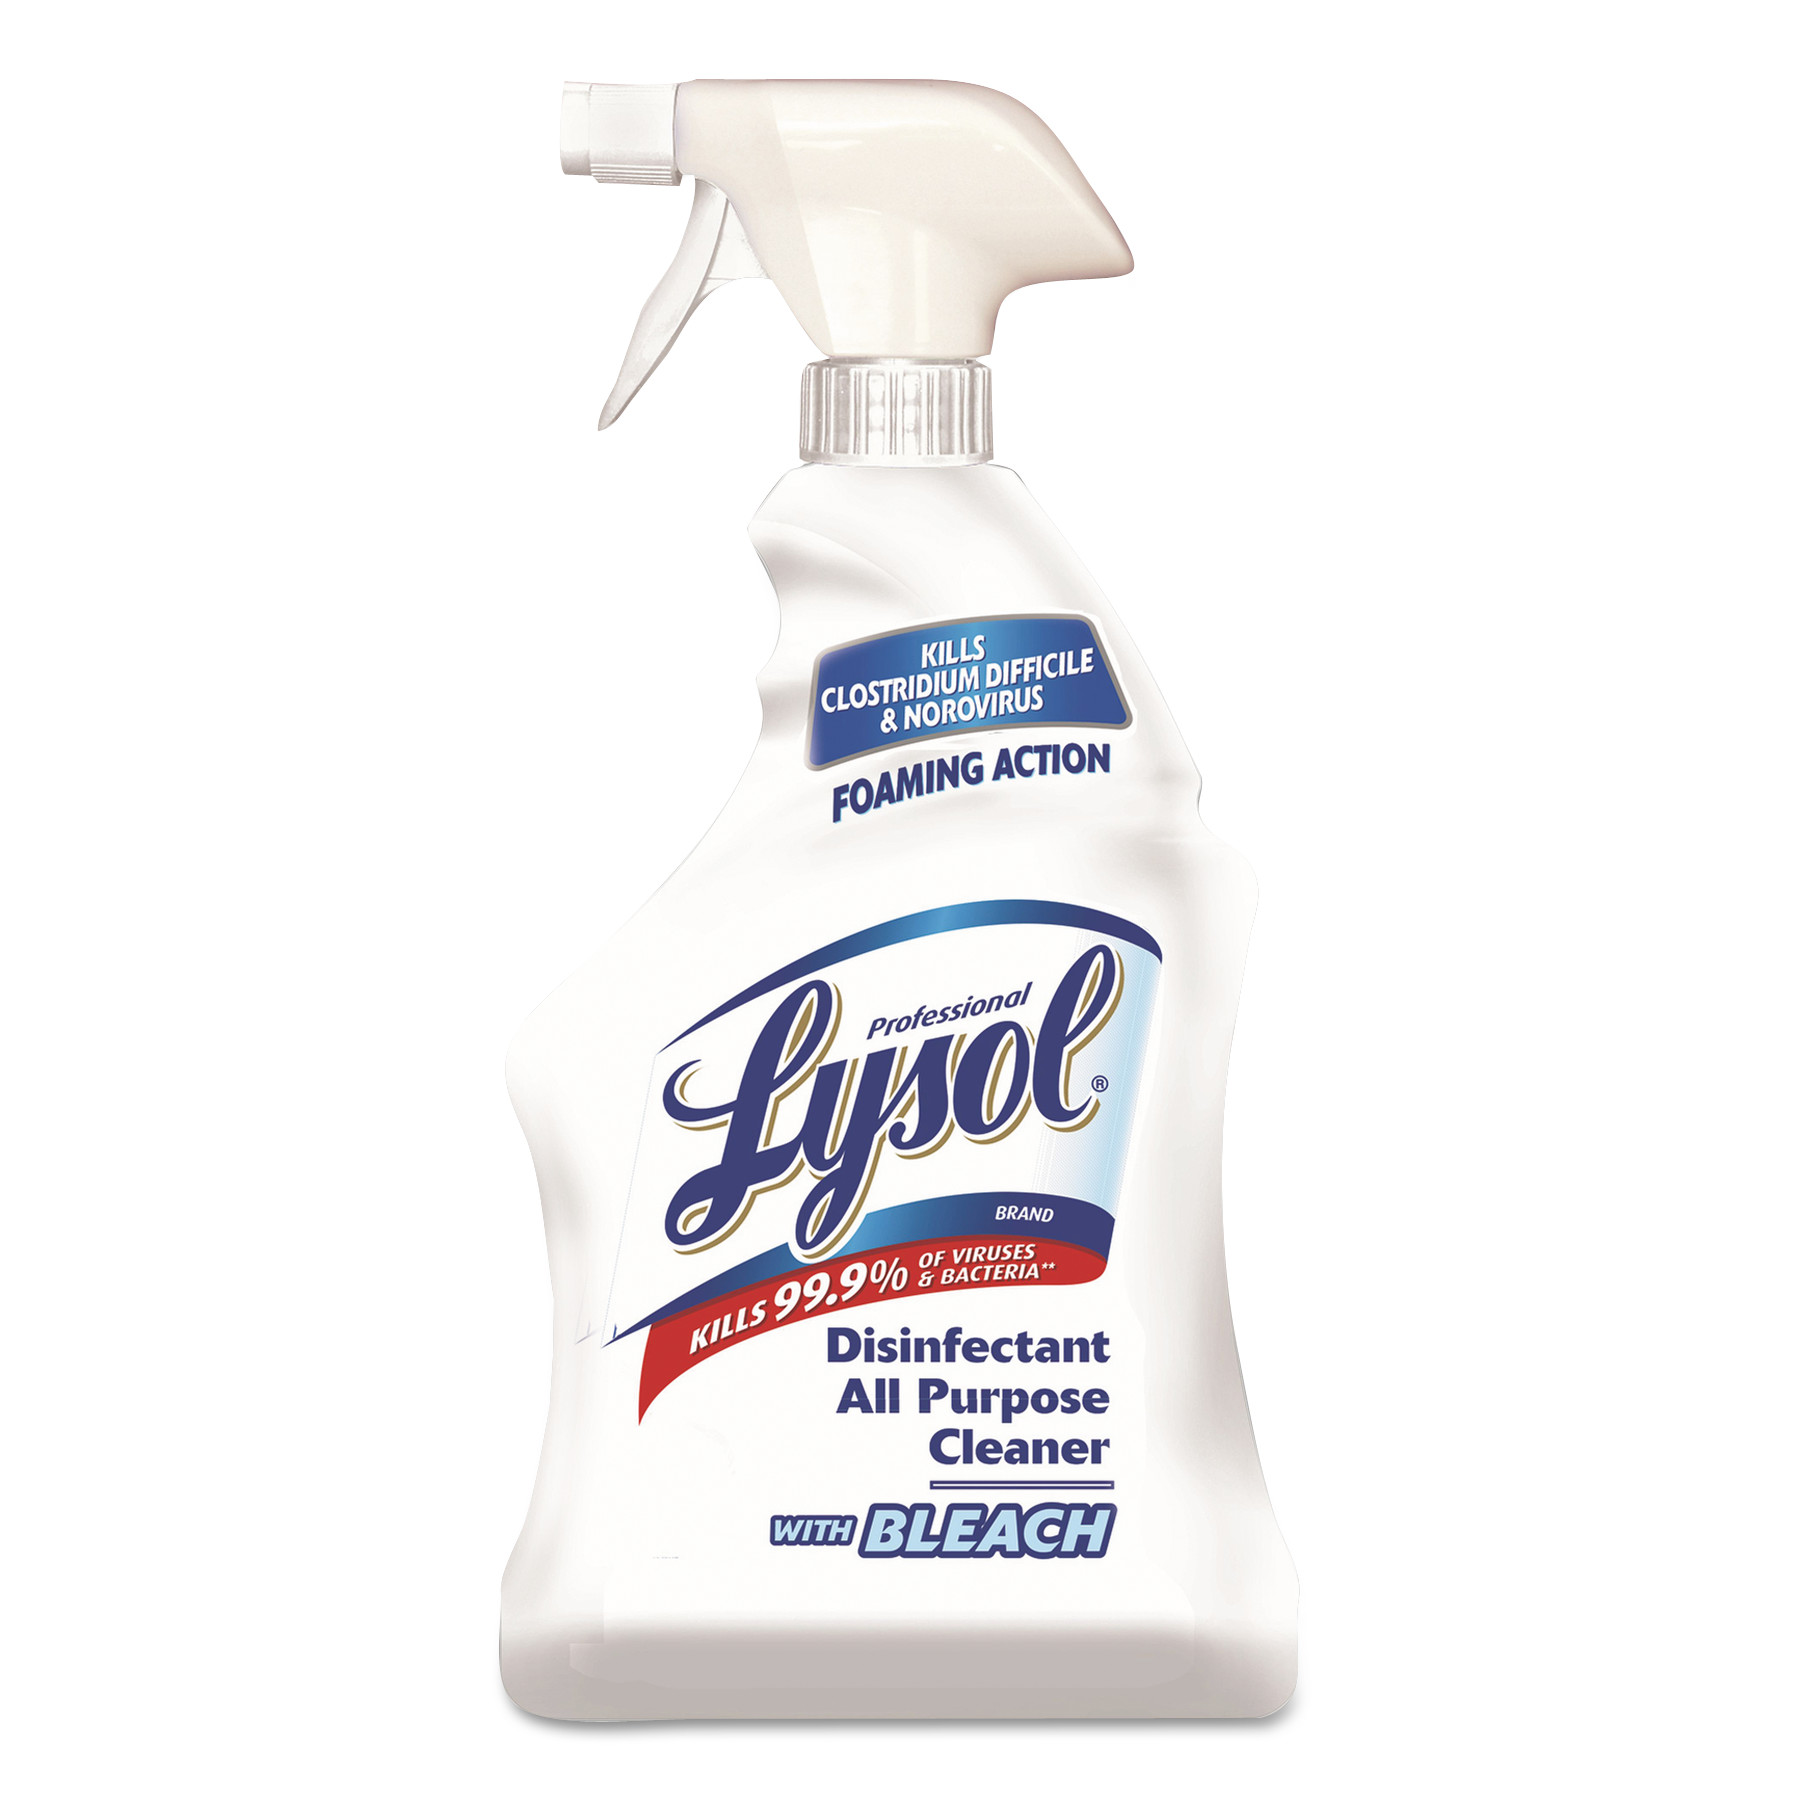  Professional LYSOL Brand 36241-90226 All-Purpose Cleaner with Bleach, 32oz Trigger Spray (RAC90226) 